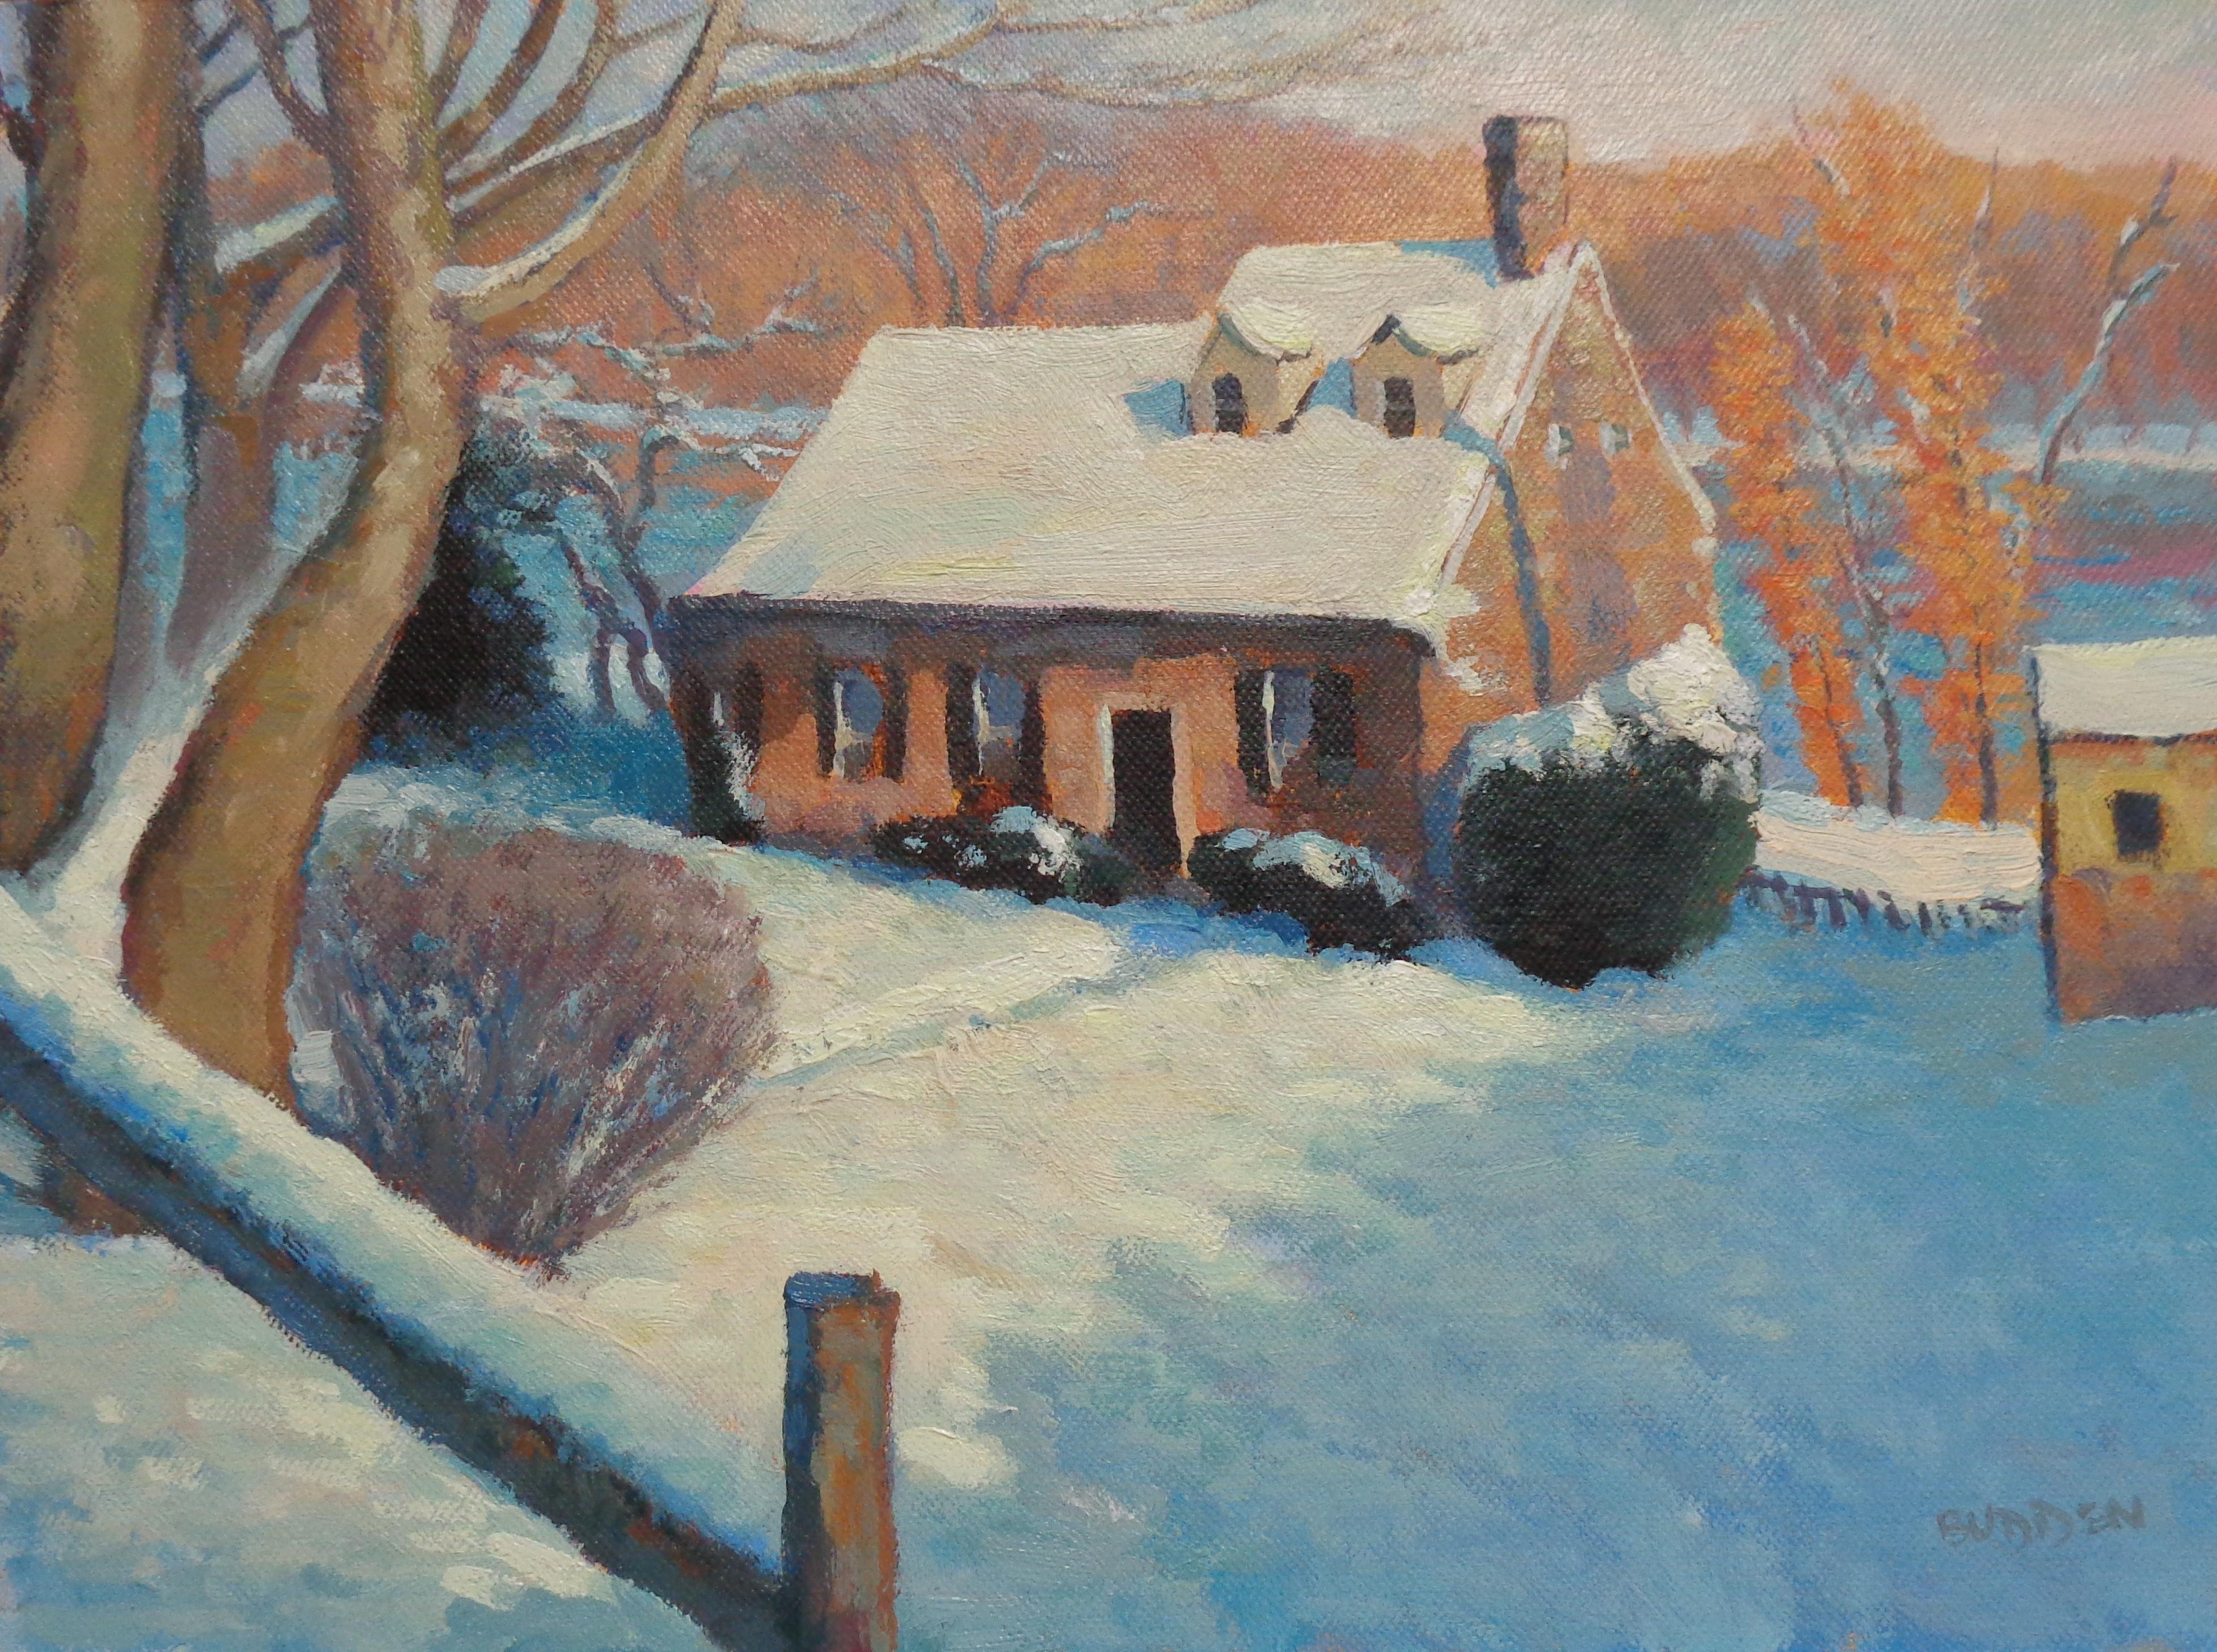 Here is a winter landscape study painting, just touched up, of a home in Lumberville, PA along the Delaware River. I particularly like the play of warm and cool colors produced by the late afternoon light. The painting is currently